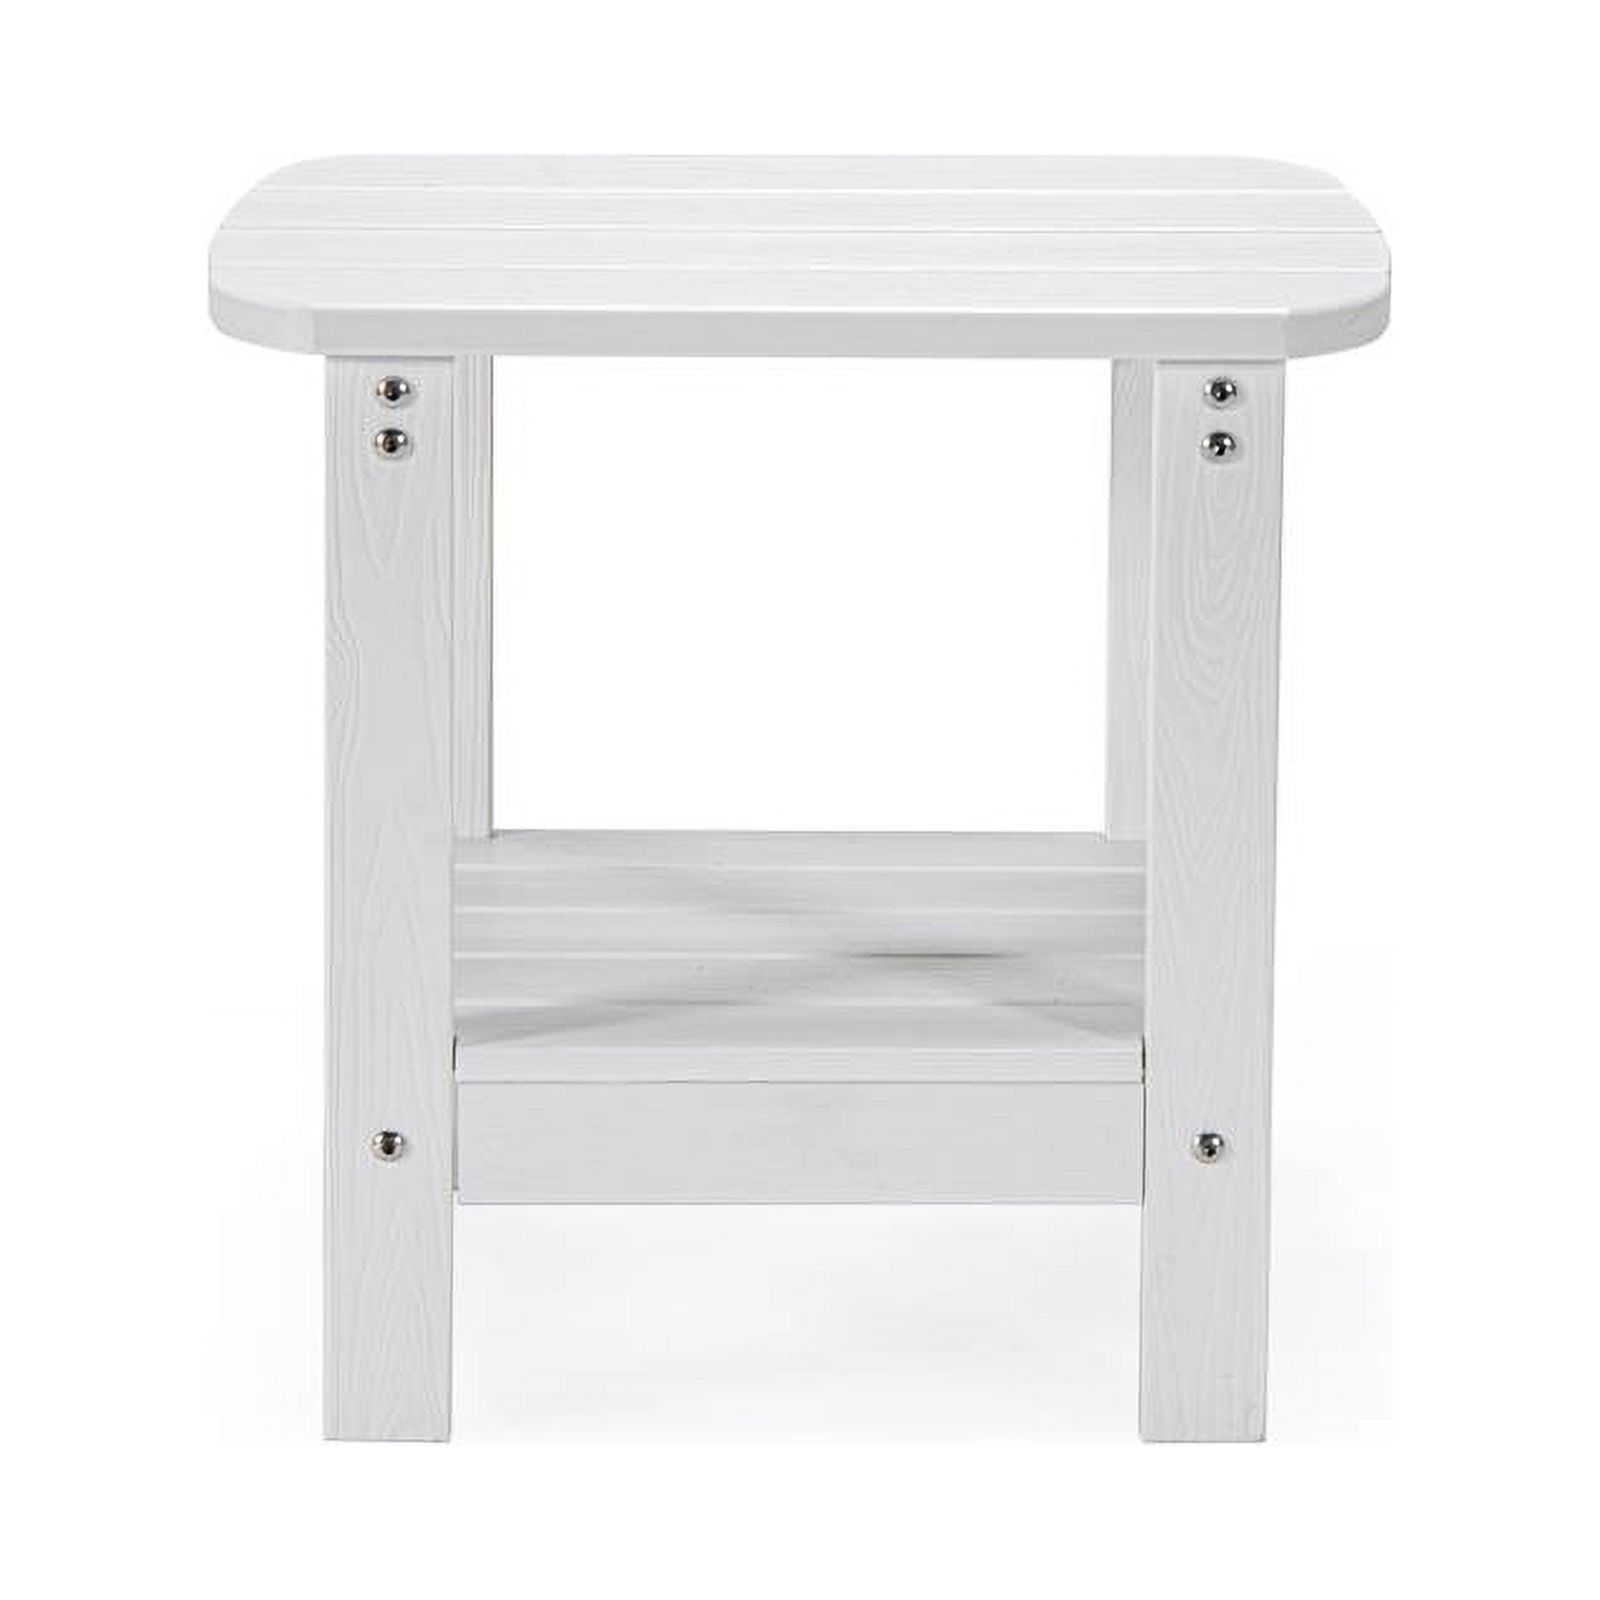 Posh Living Clive Outdoor Side Table White - image 5 of 9